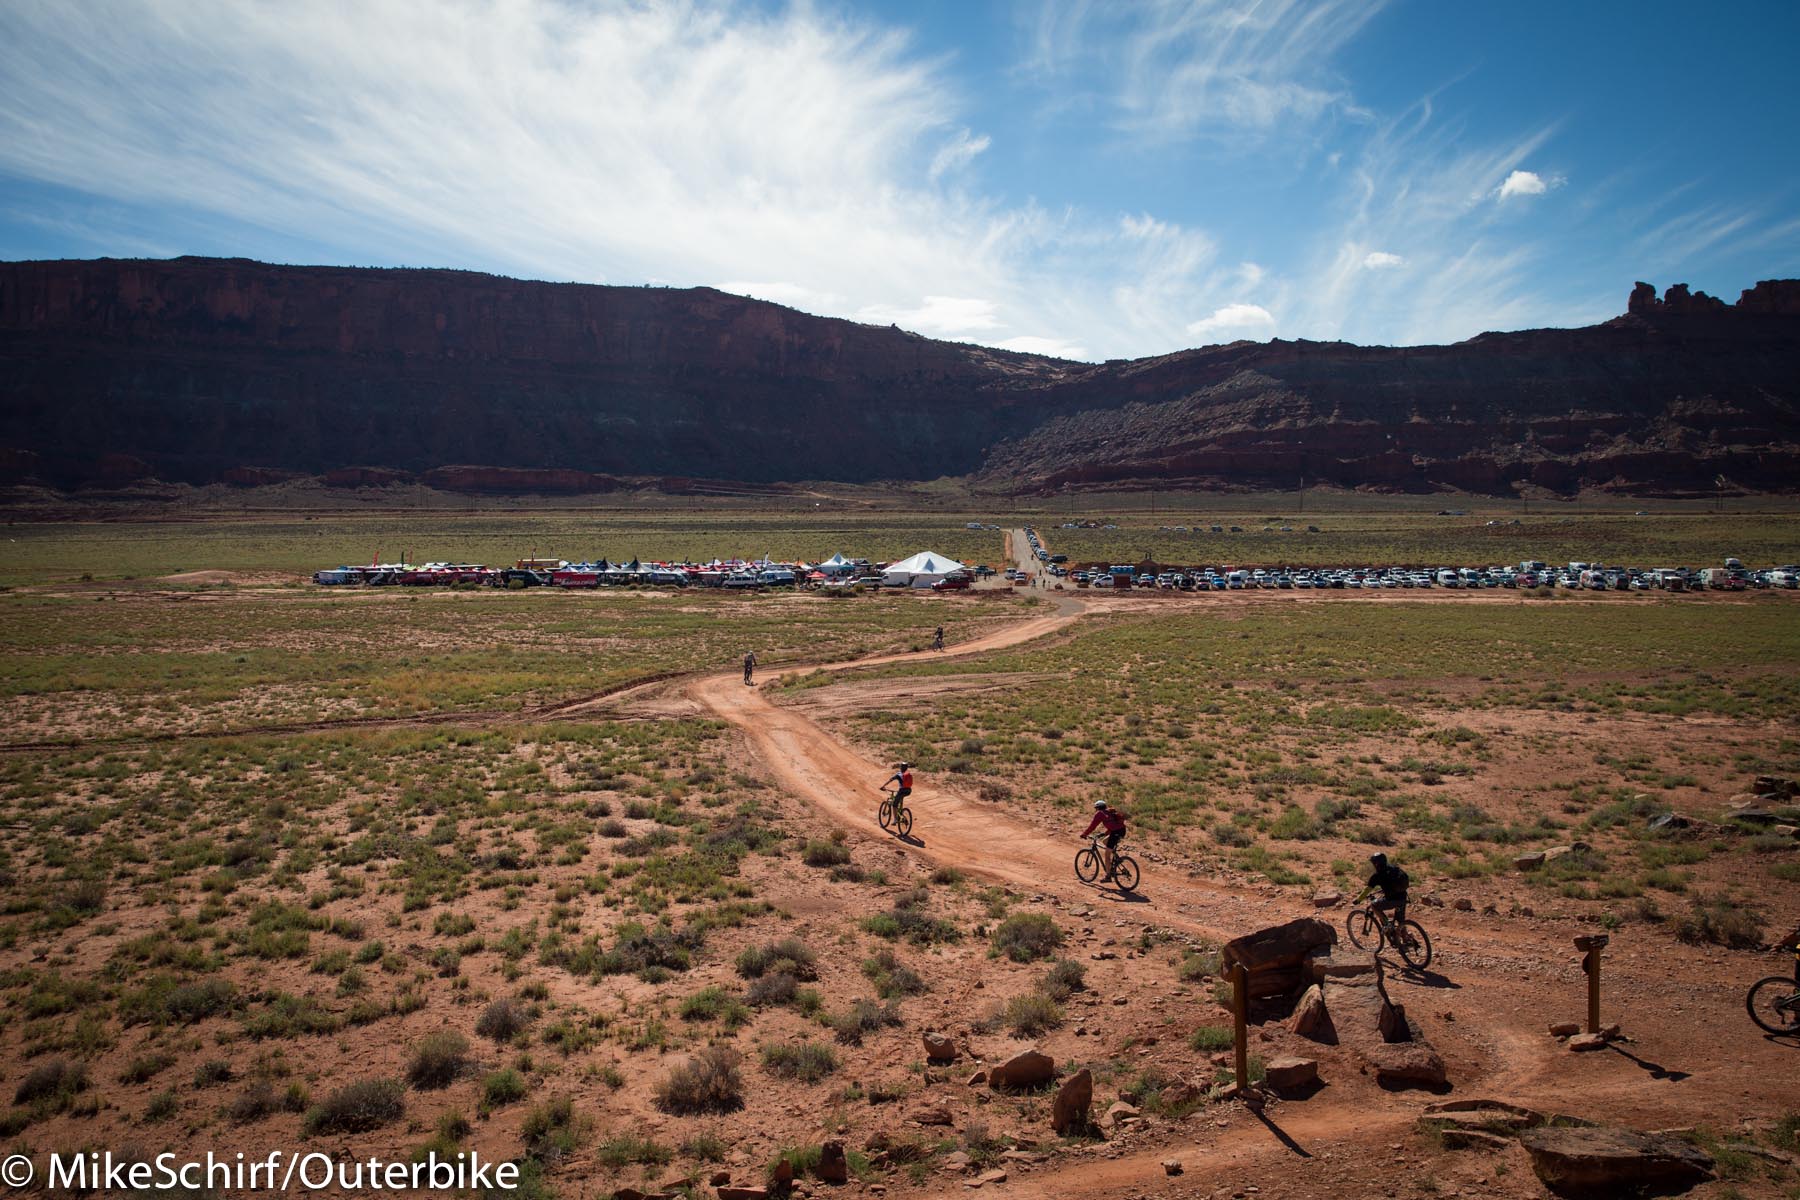 Outerbike is held next to the Brand trails trailhead, north of Moab. Photo: Mike Schirf